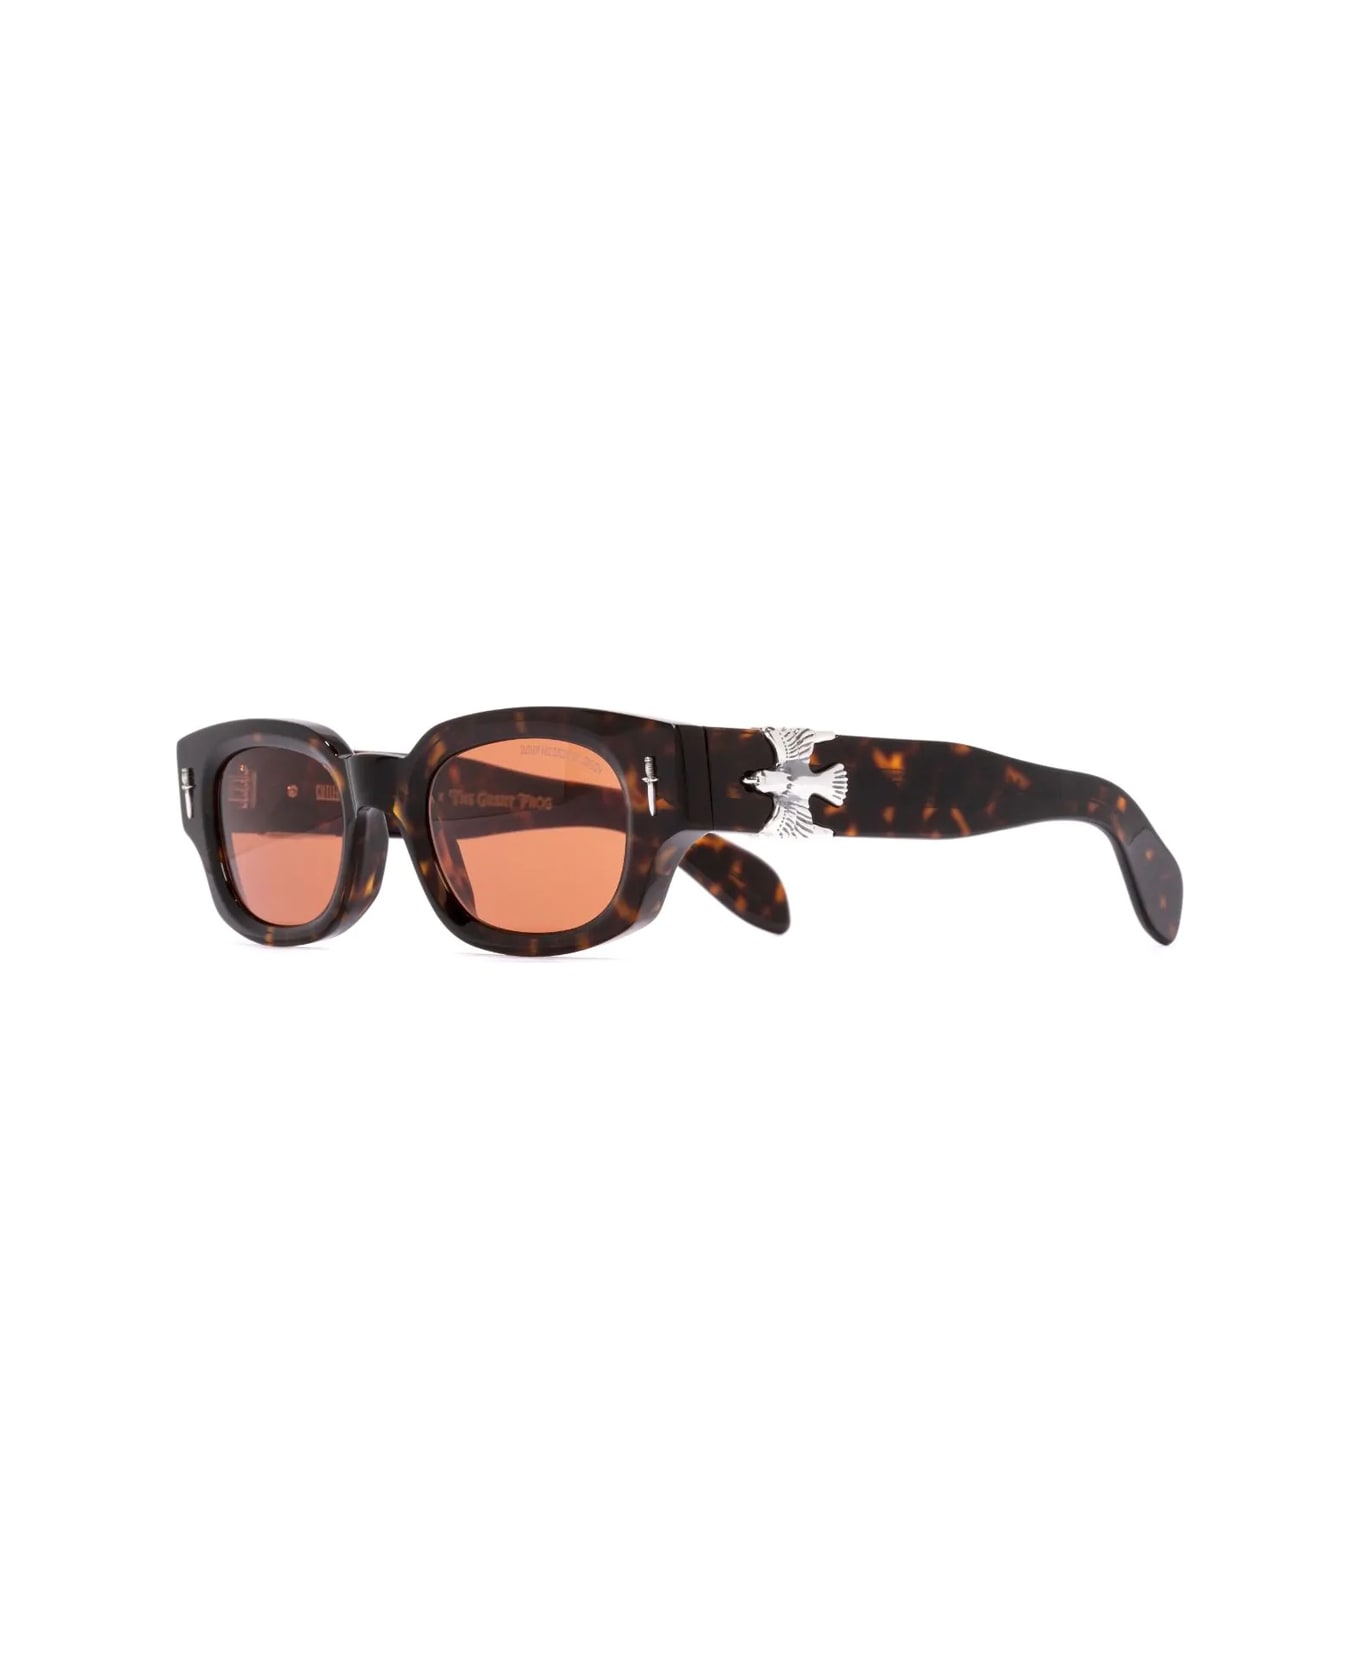 Cutler and Gross Great Frog 004 02 Sunglasses - Marrone